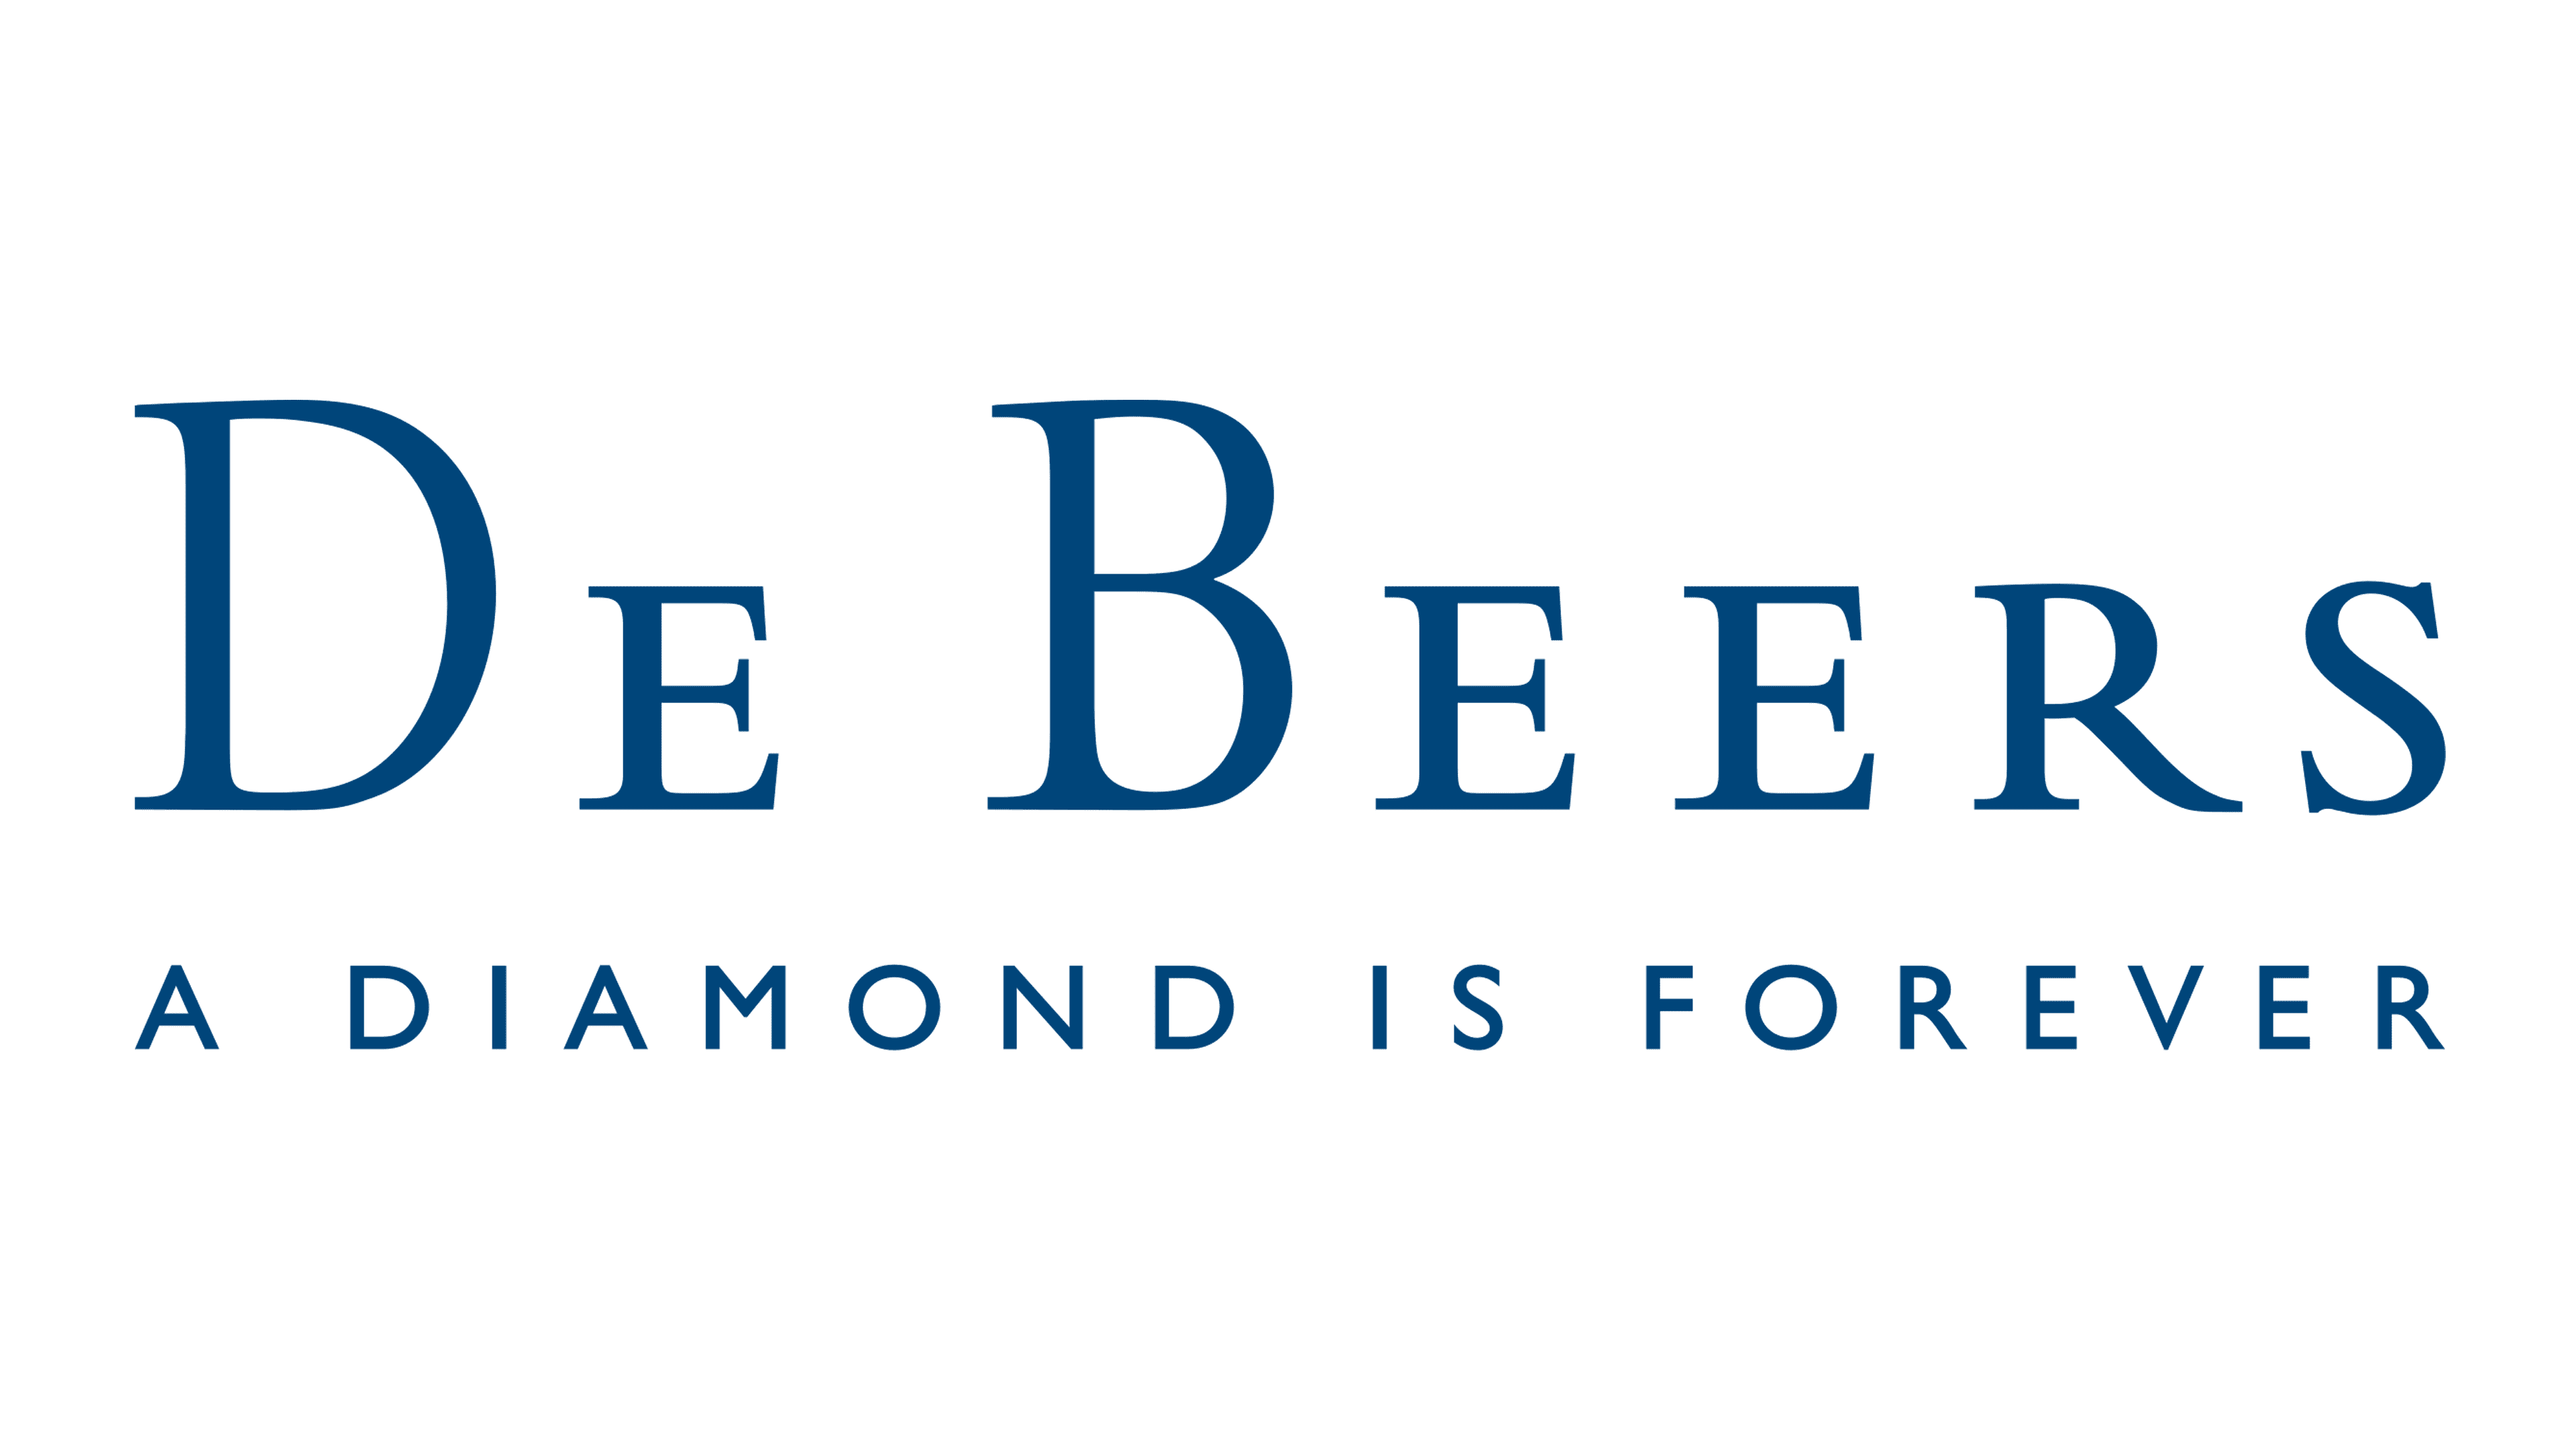 to work with diamond company De Beers Group to revolutionize  computer networks